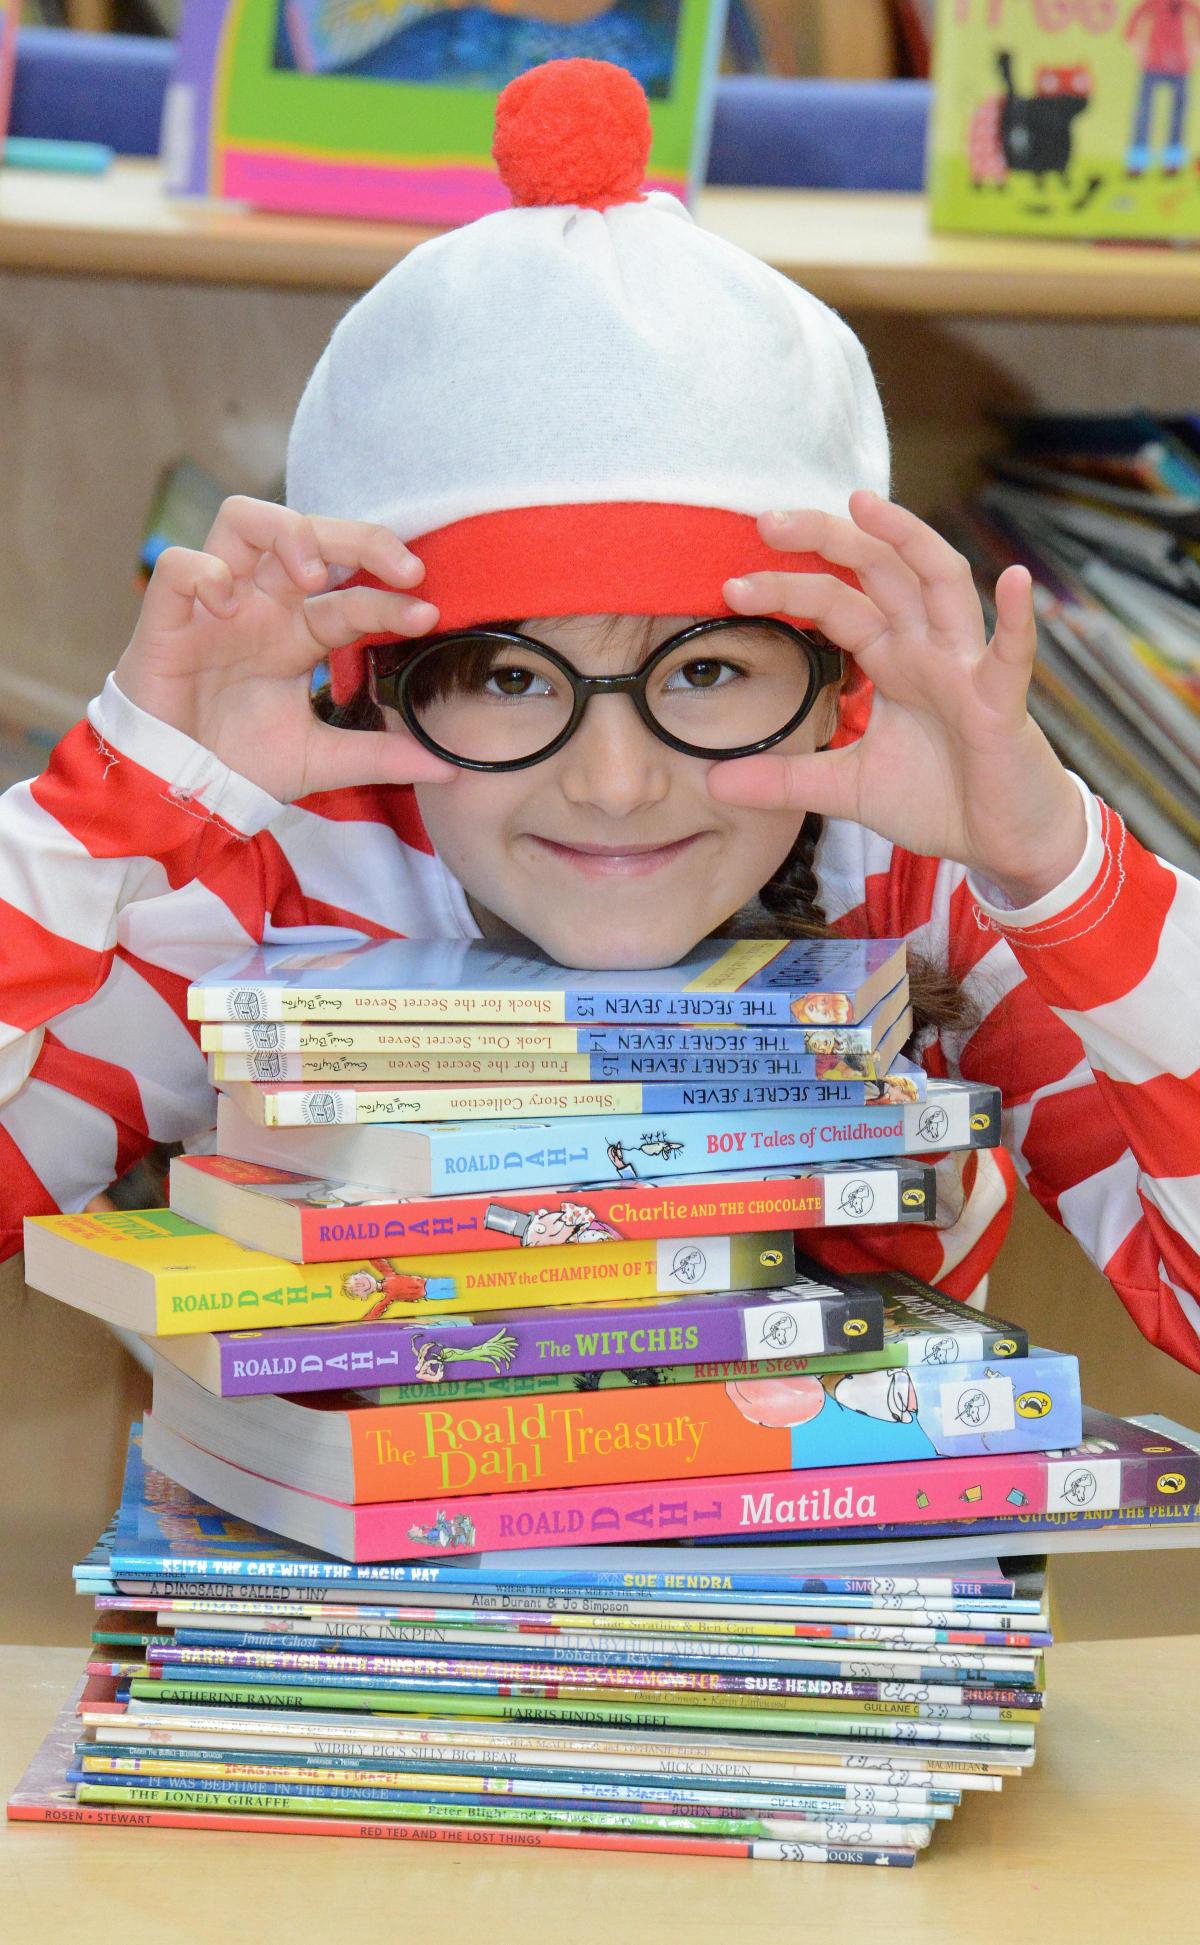 Alisha Woolner dressed up as Where's Wally at Allerton Primary School for World Book Day